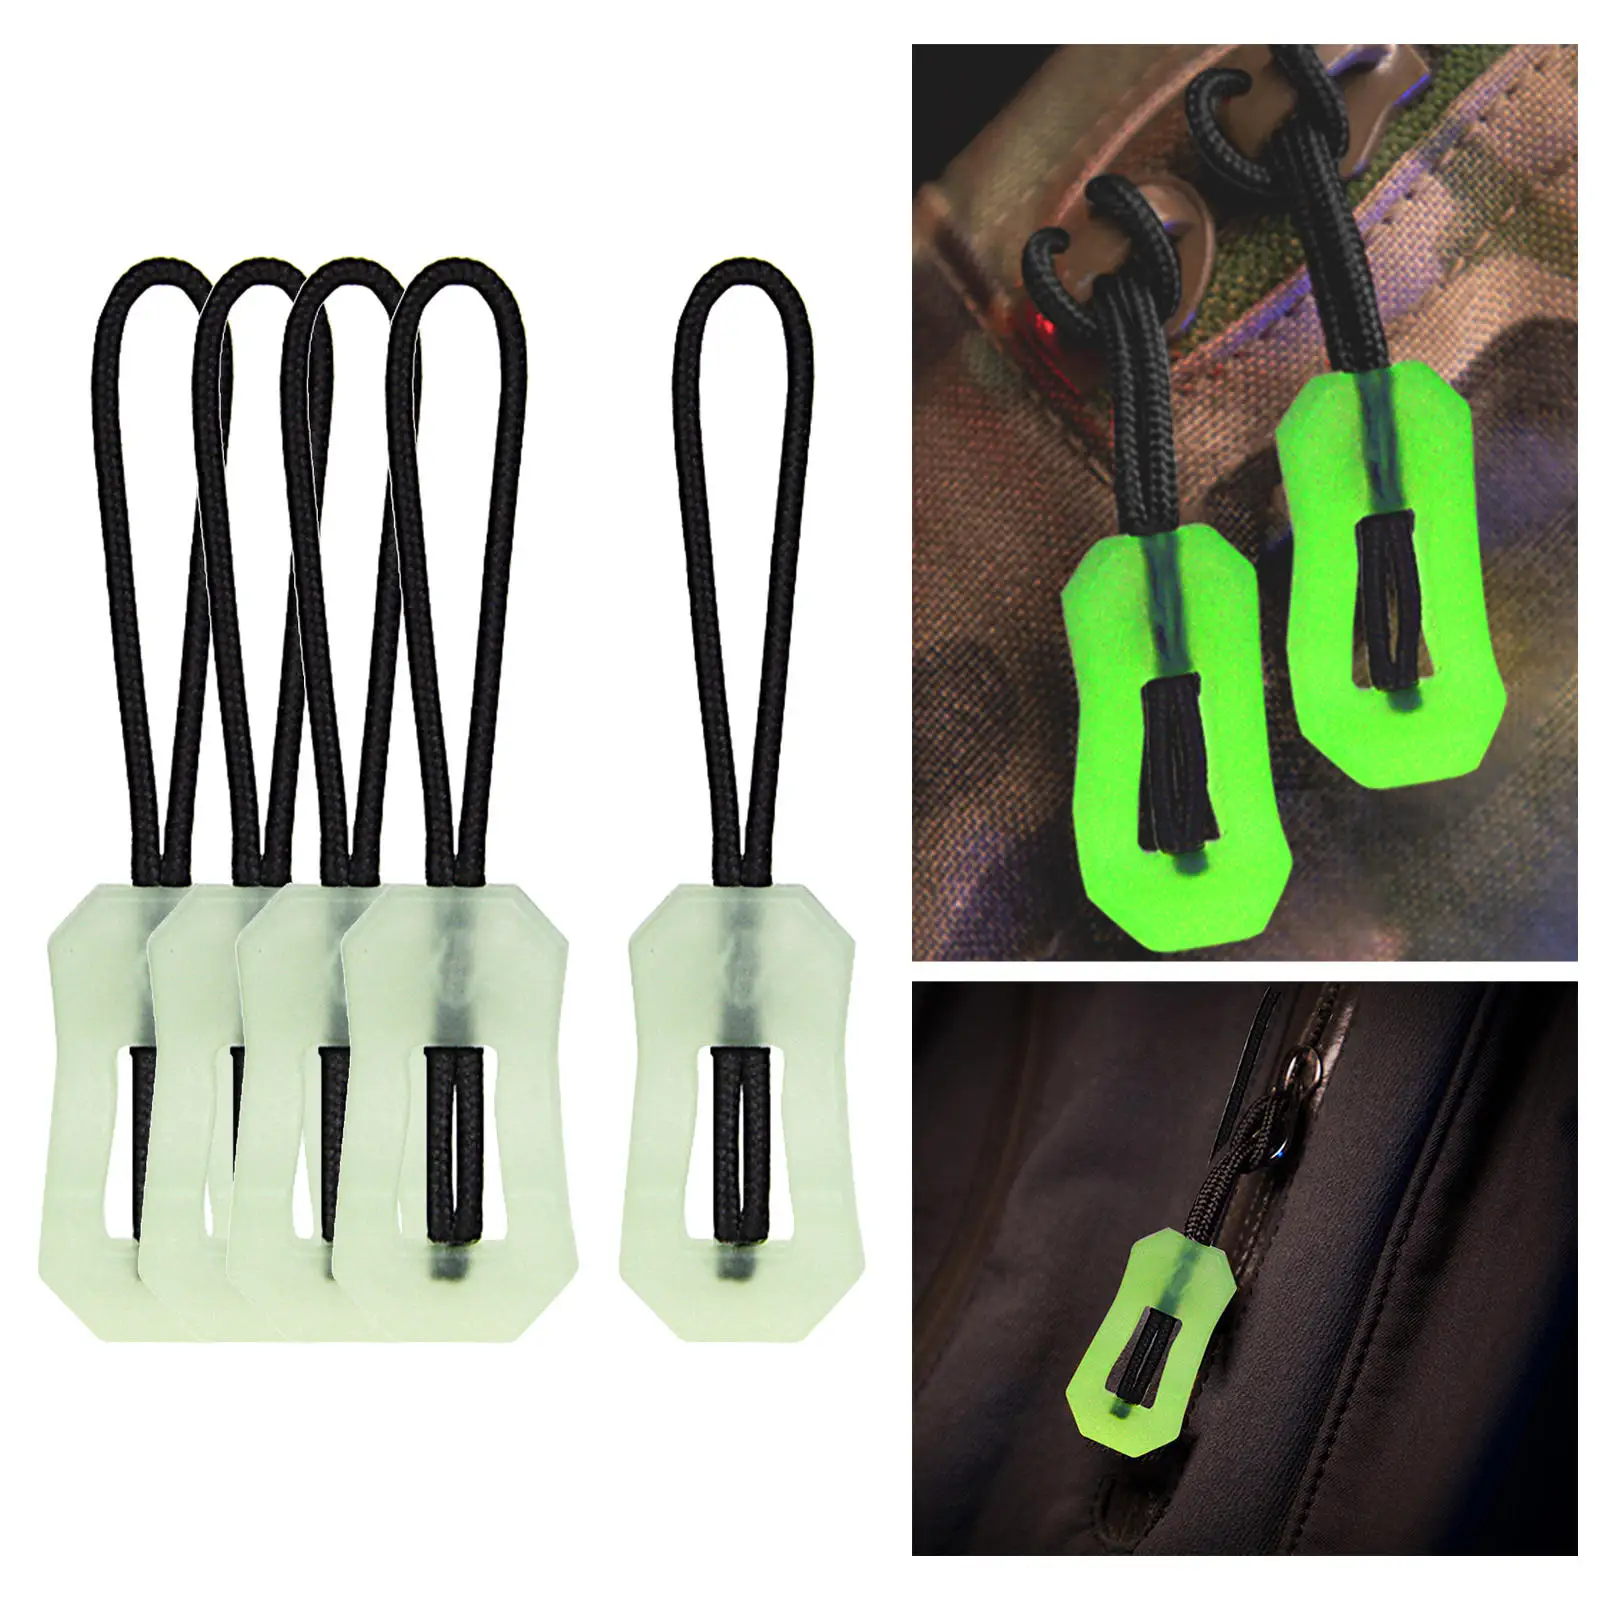 5x Portable Luminous Zipper Pulls Glow in The Dark Zip Ropes Markers for Mountaineering Jackets Outdoor Hiking Traveling Cases